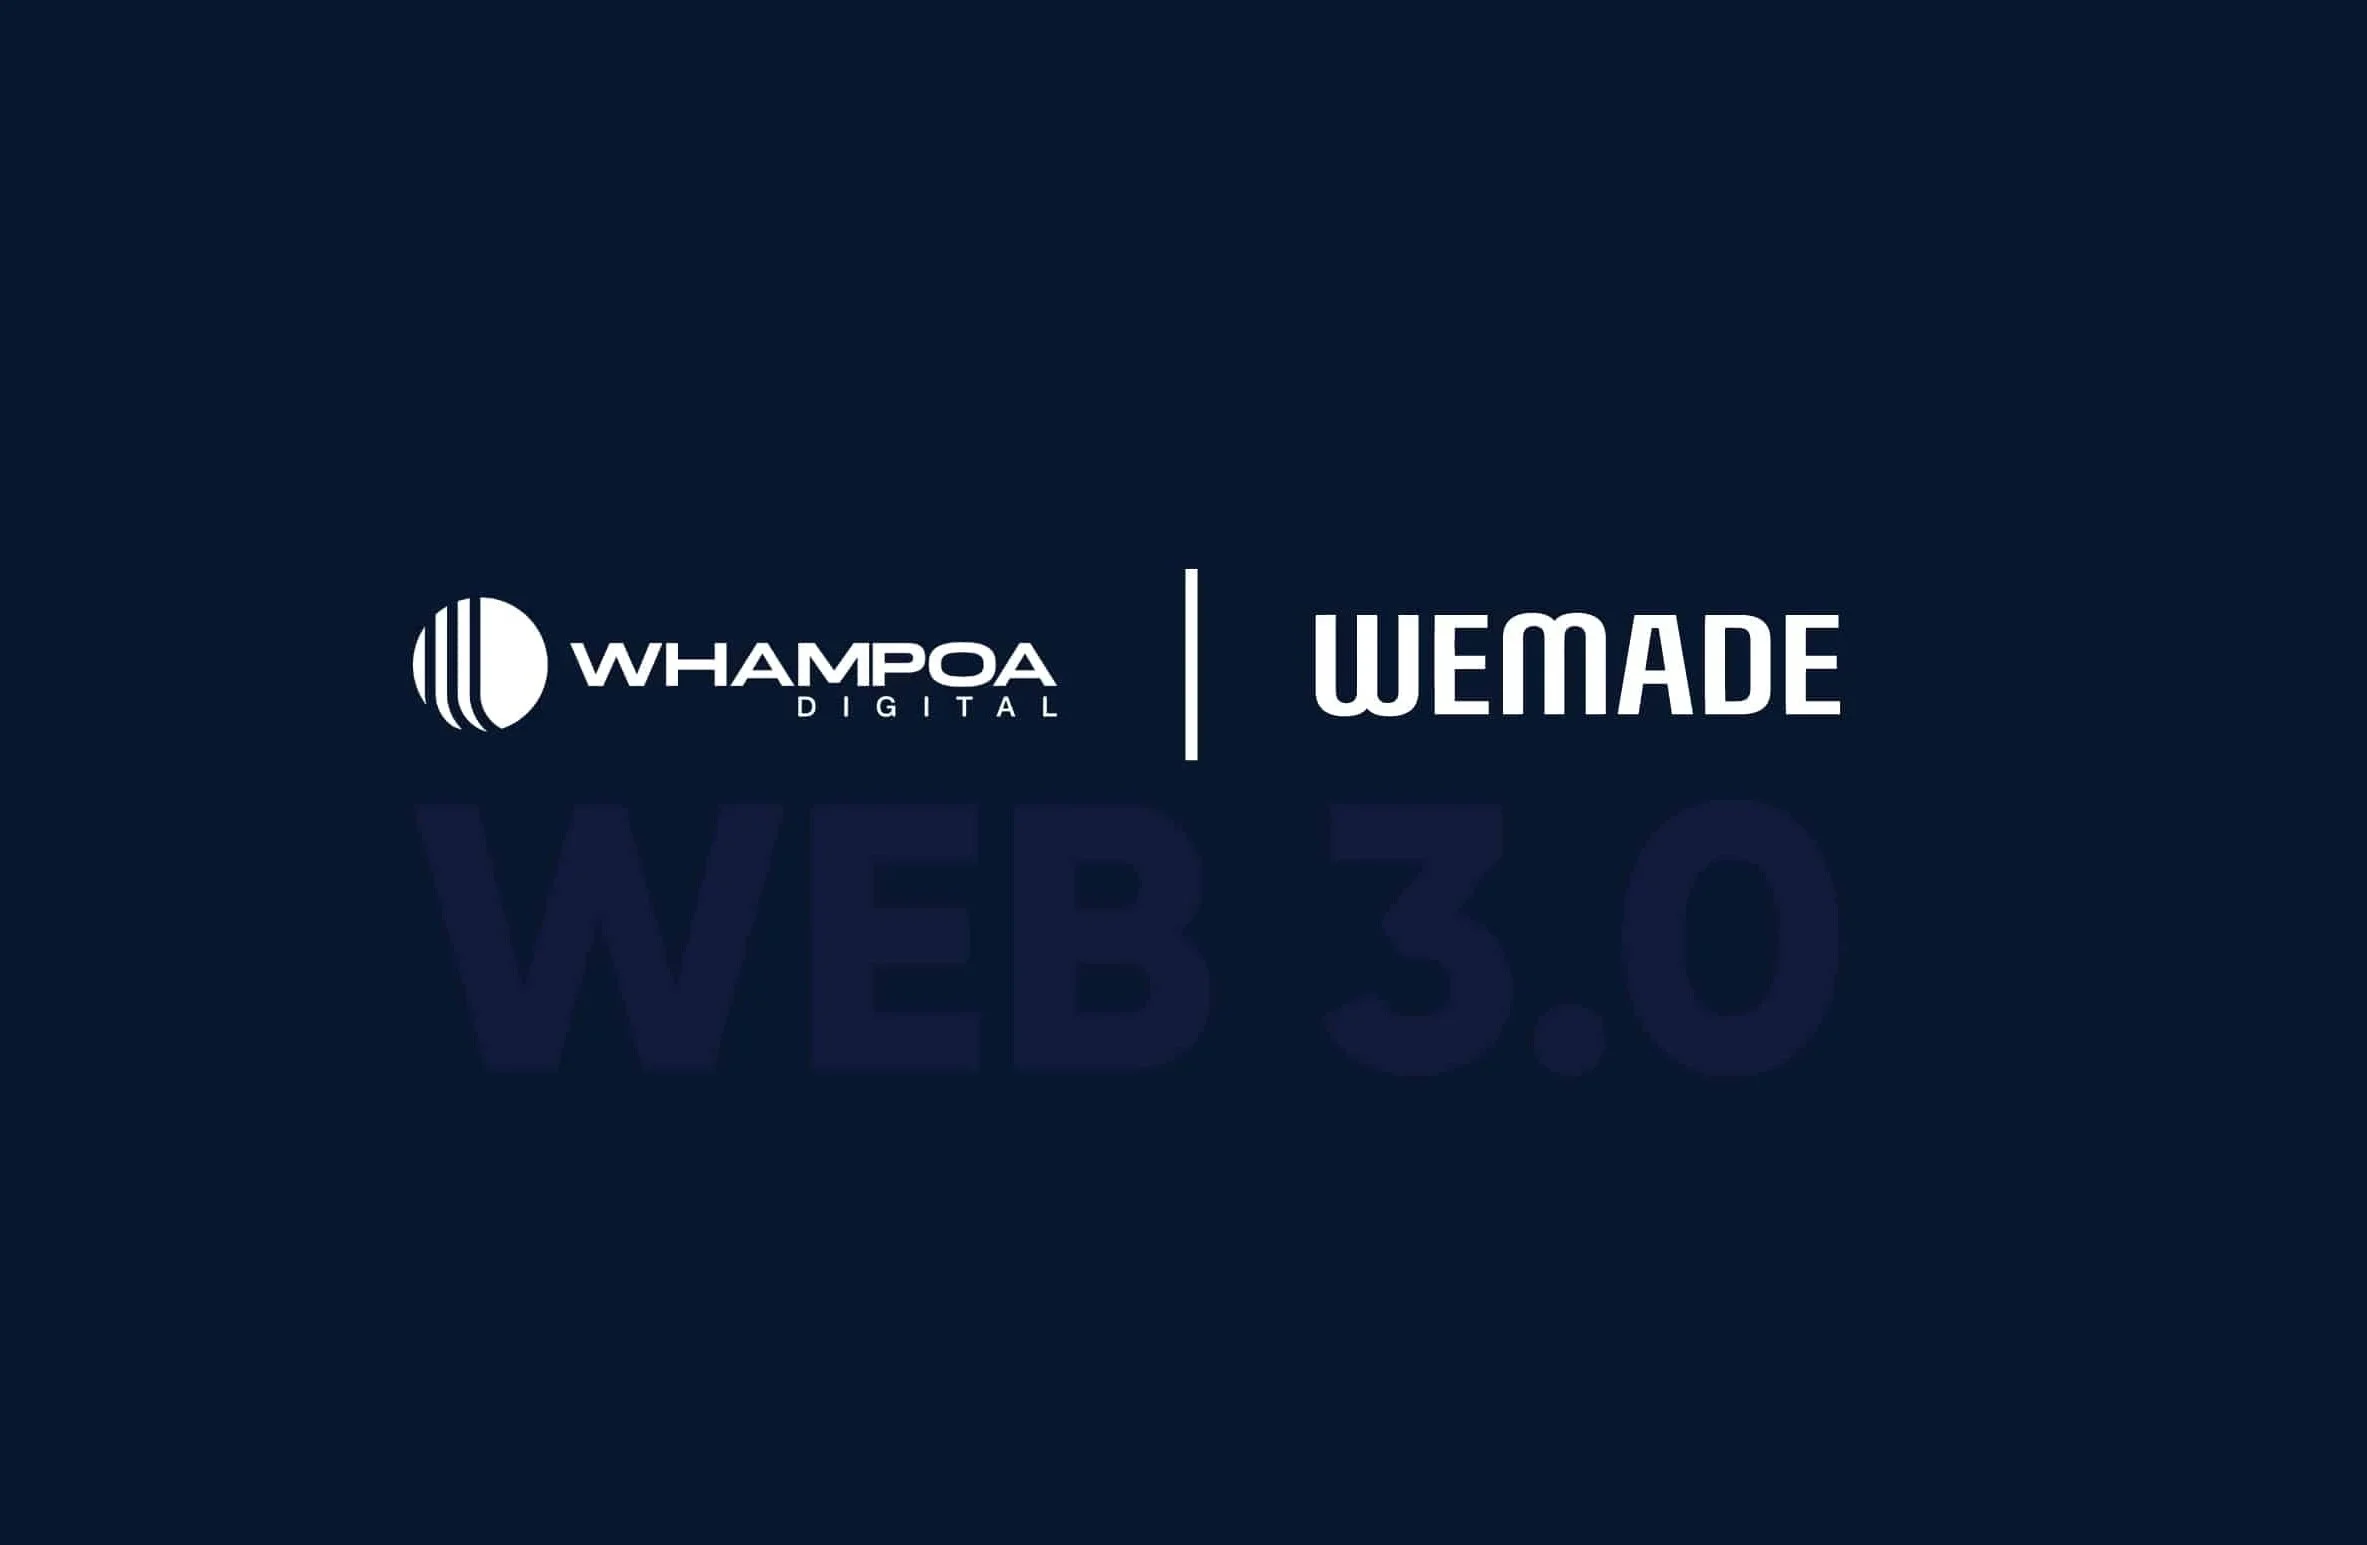 Wemade Collaborates With Whampoa Digital For Web3 Gaming Projects